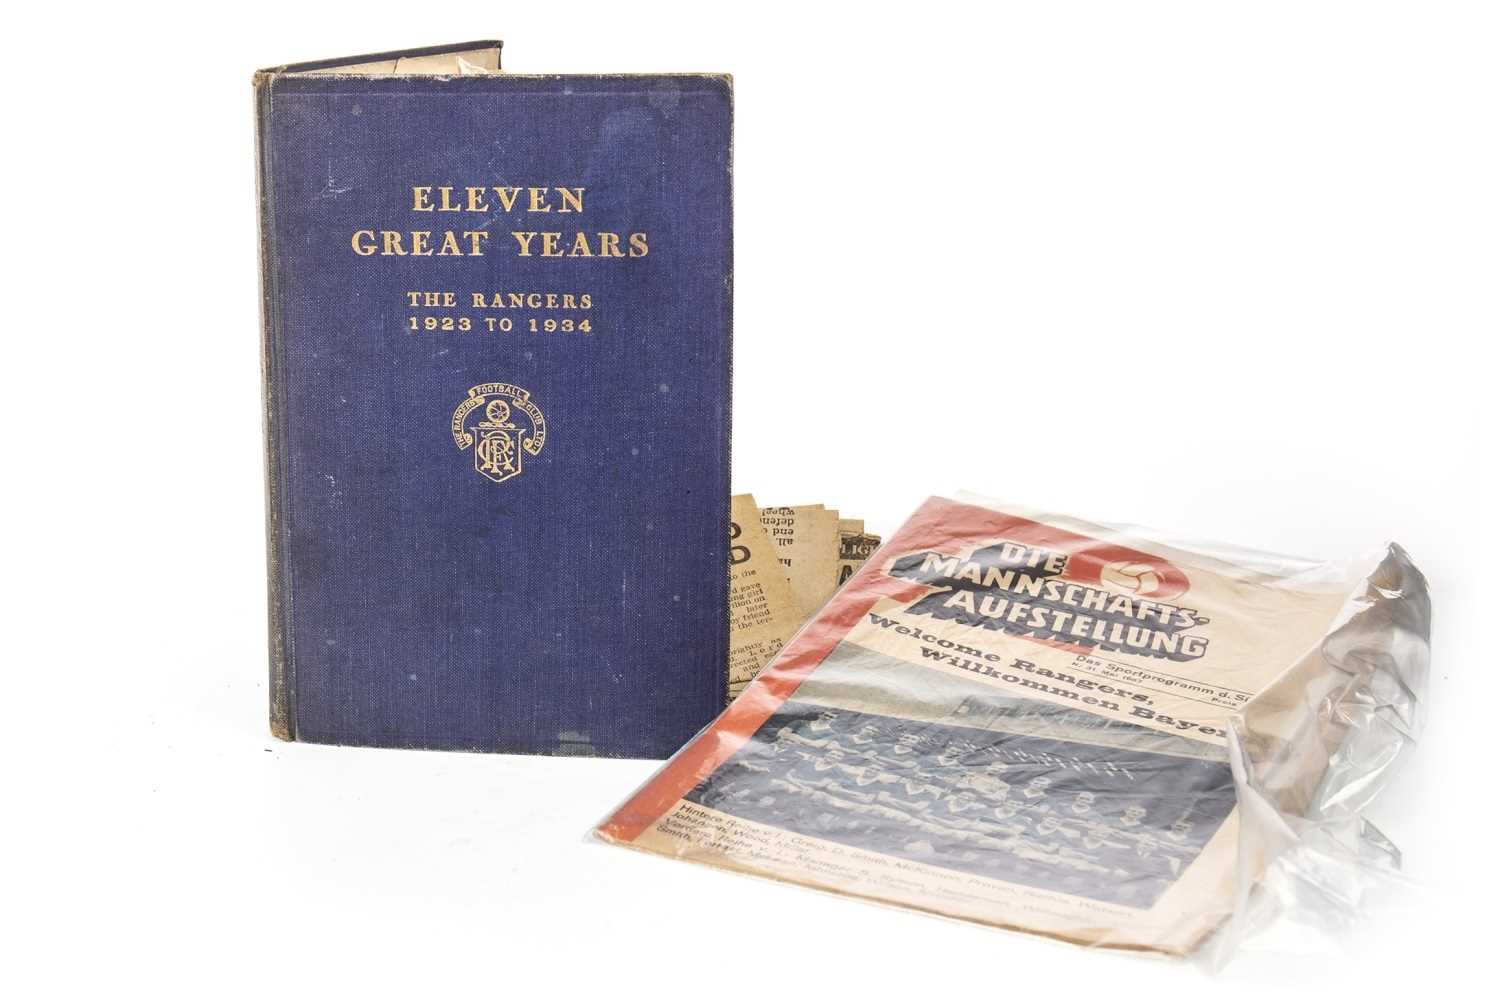 Lot 1814 - ELEVEN GREAT YEARS, THE RANGERS 1923 TO 1934, BY JOHN ALLAN